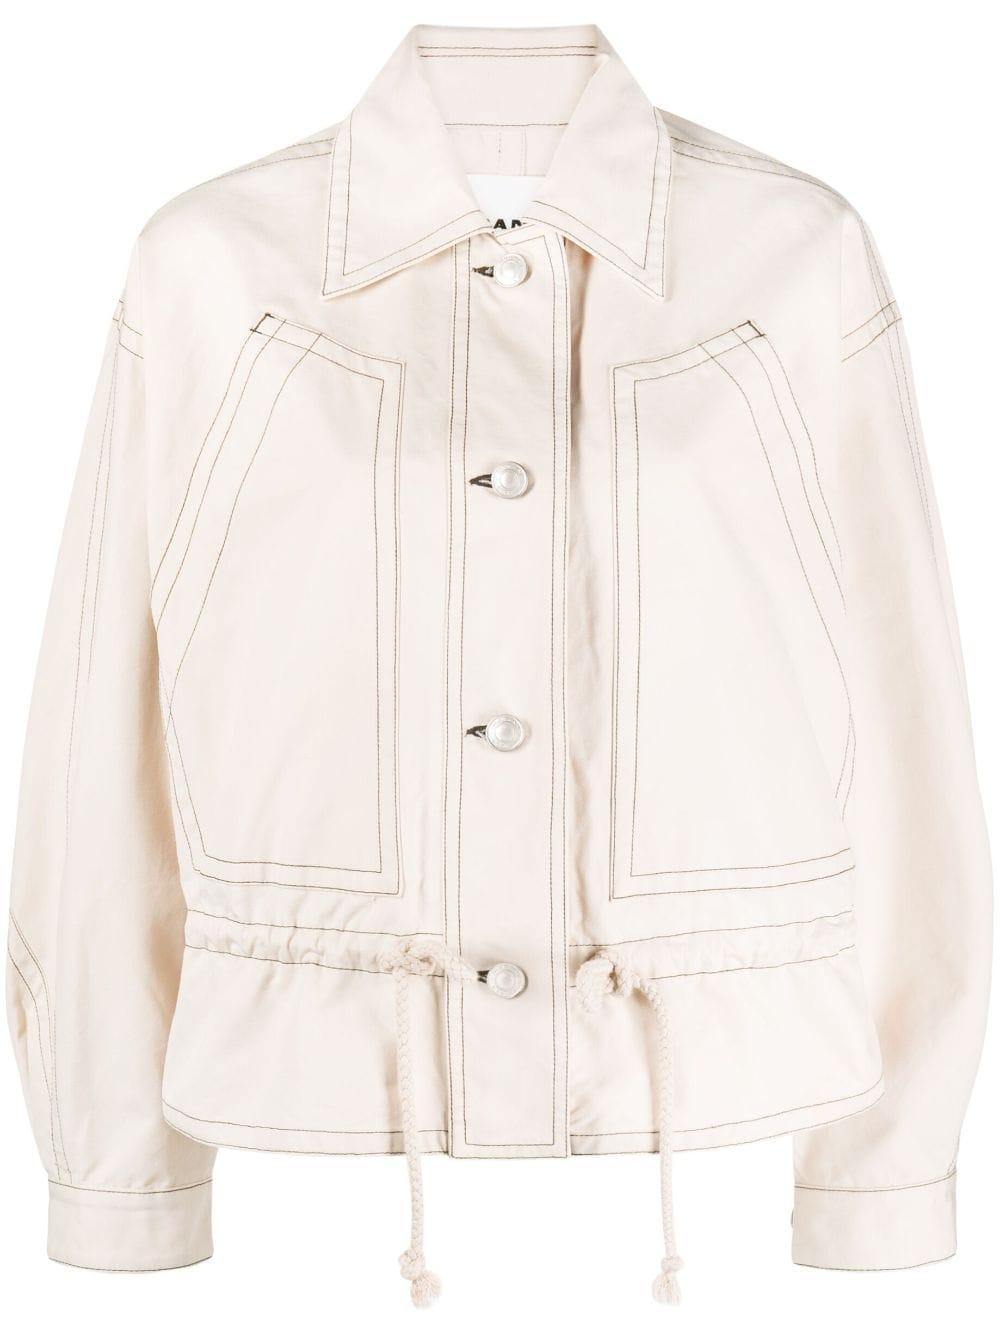 MARANT ETOILE Delly Cotton Jacket in Natural | Lyst